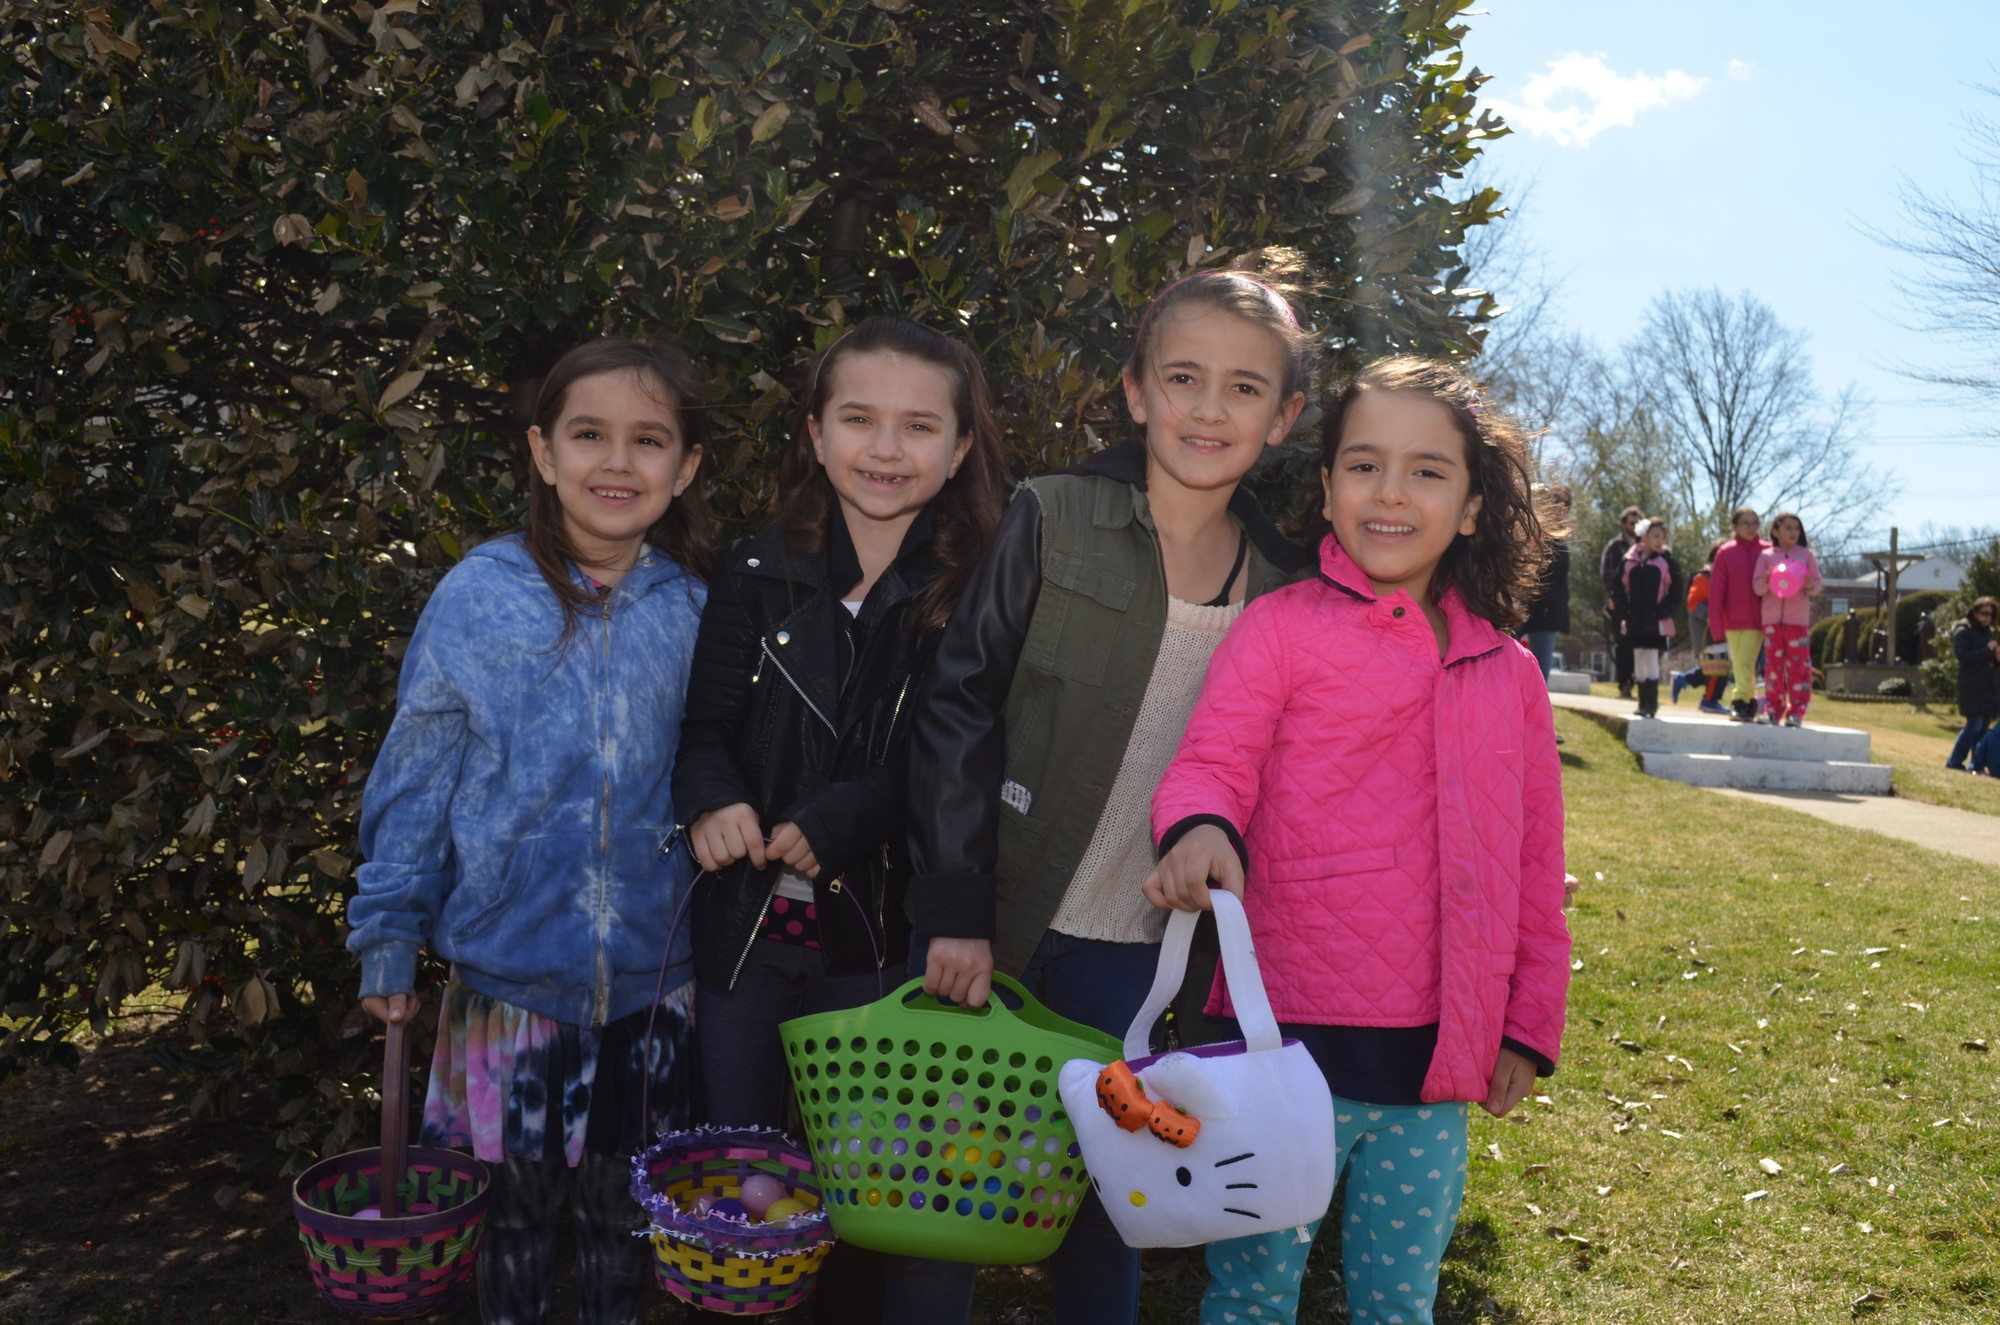 The egg hunt was good to sisters Lore, 6, Gabriella, 7, and Jule, 8, Villalba and friends Francesca Garcia Rocha, 6, all Hewlett residents as they showed off their baskets.